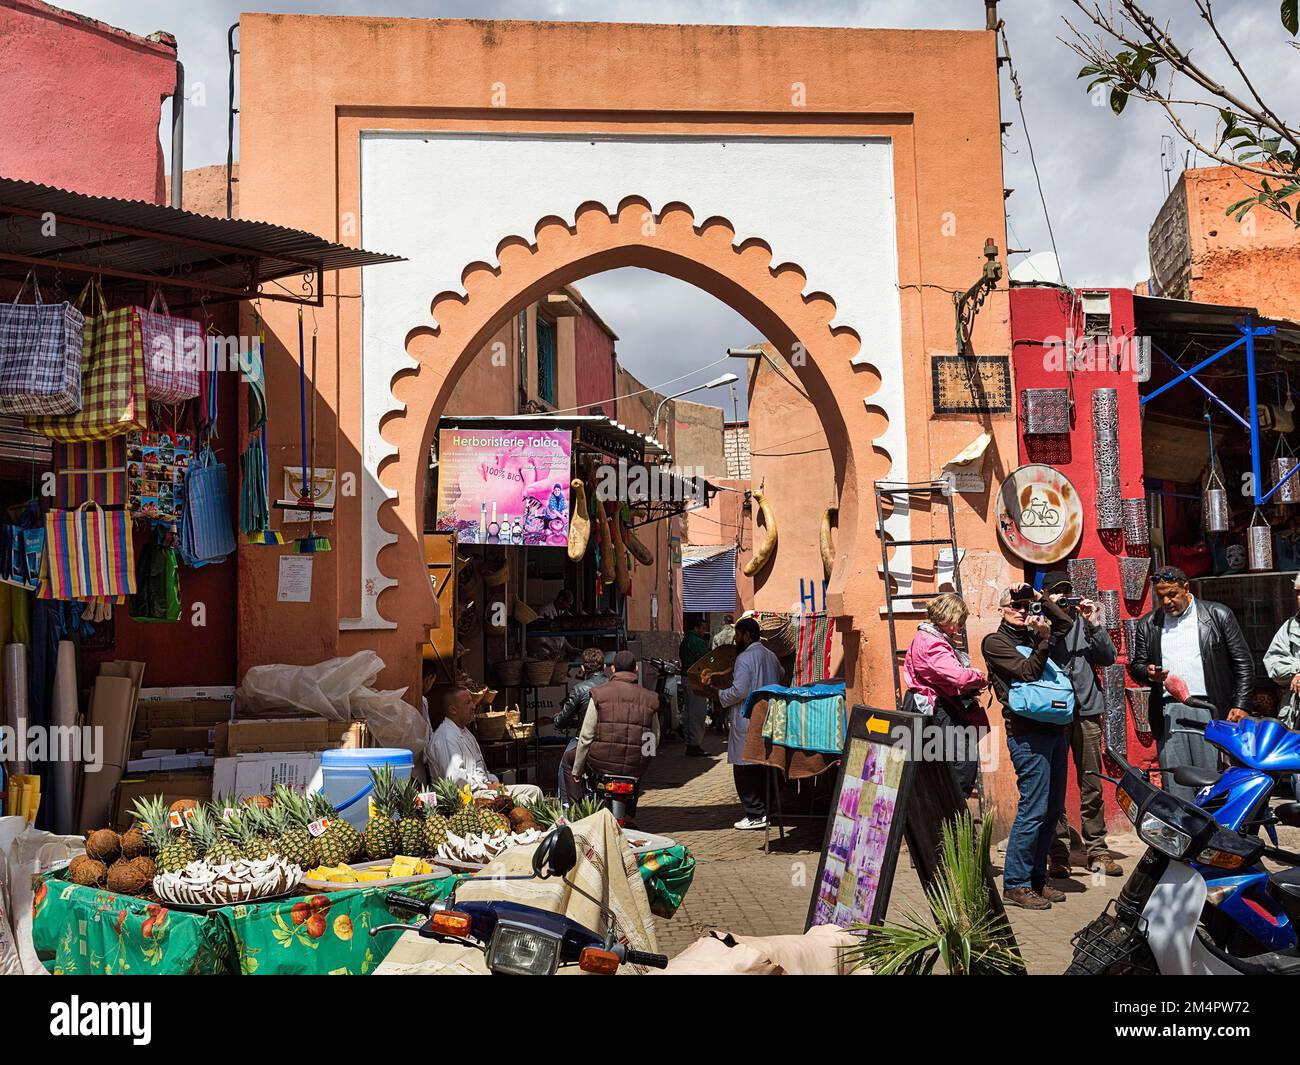 Ornate gate in the bustling souk, colourful shops, stalls, tourists and passers-by, Medina, UNESCO World Heritage Site, Marrakech, Morocco Stock Photo